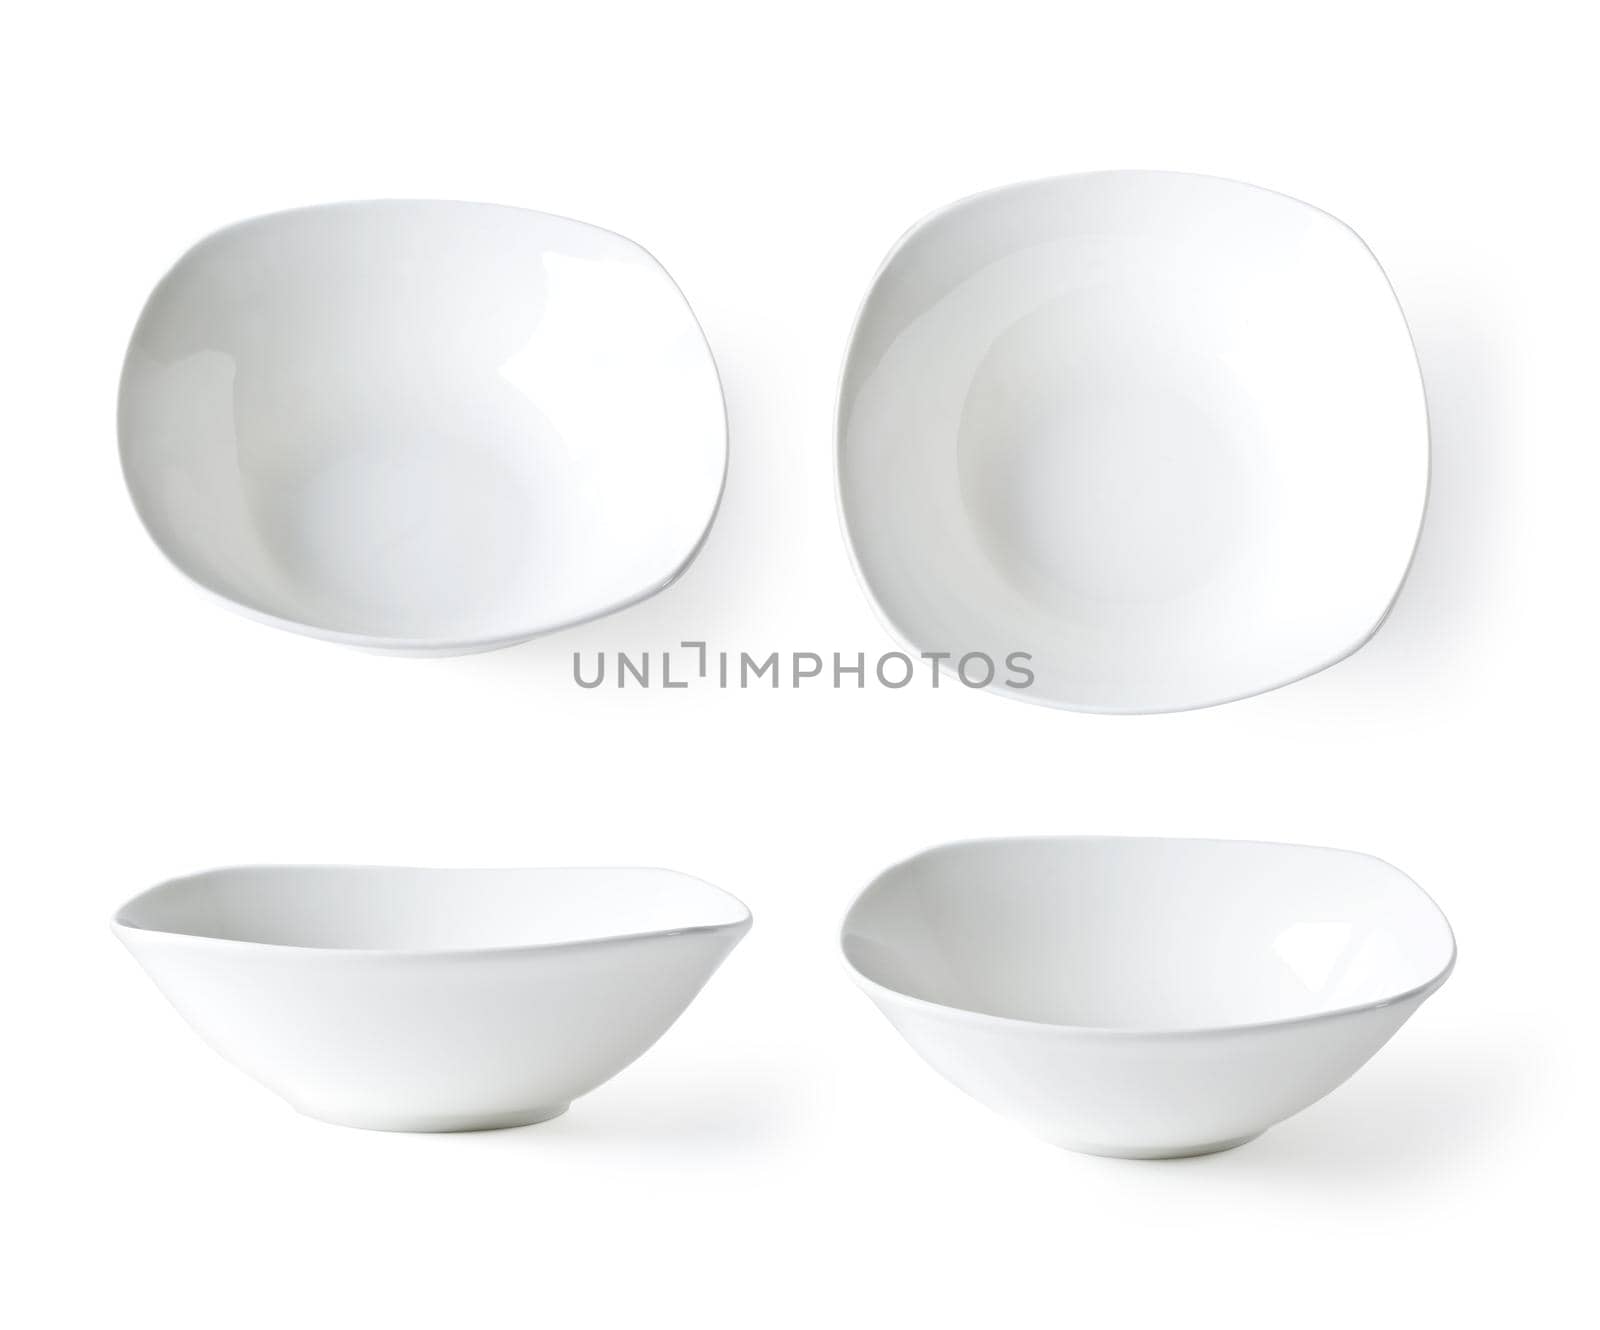 set of empty white plate on the white background